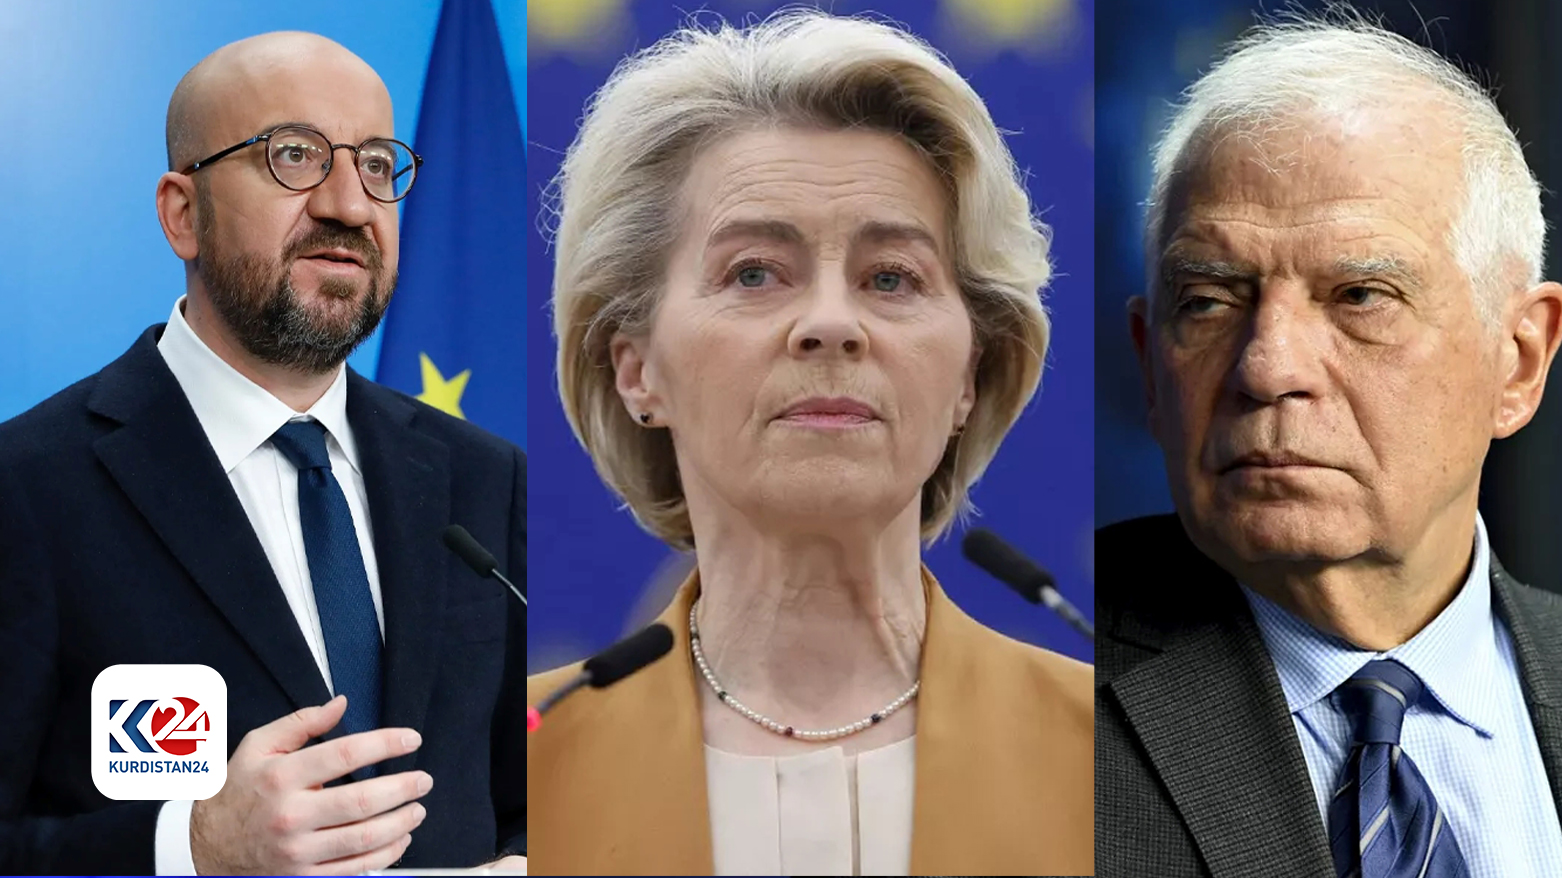 Three senior EU positions to be changed amid farright political gains